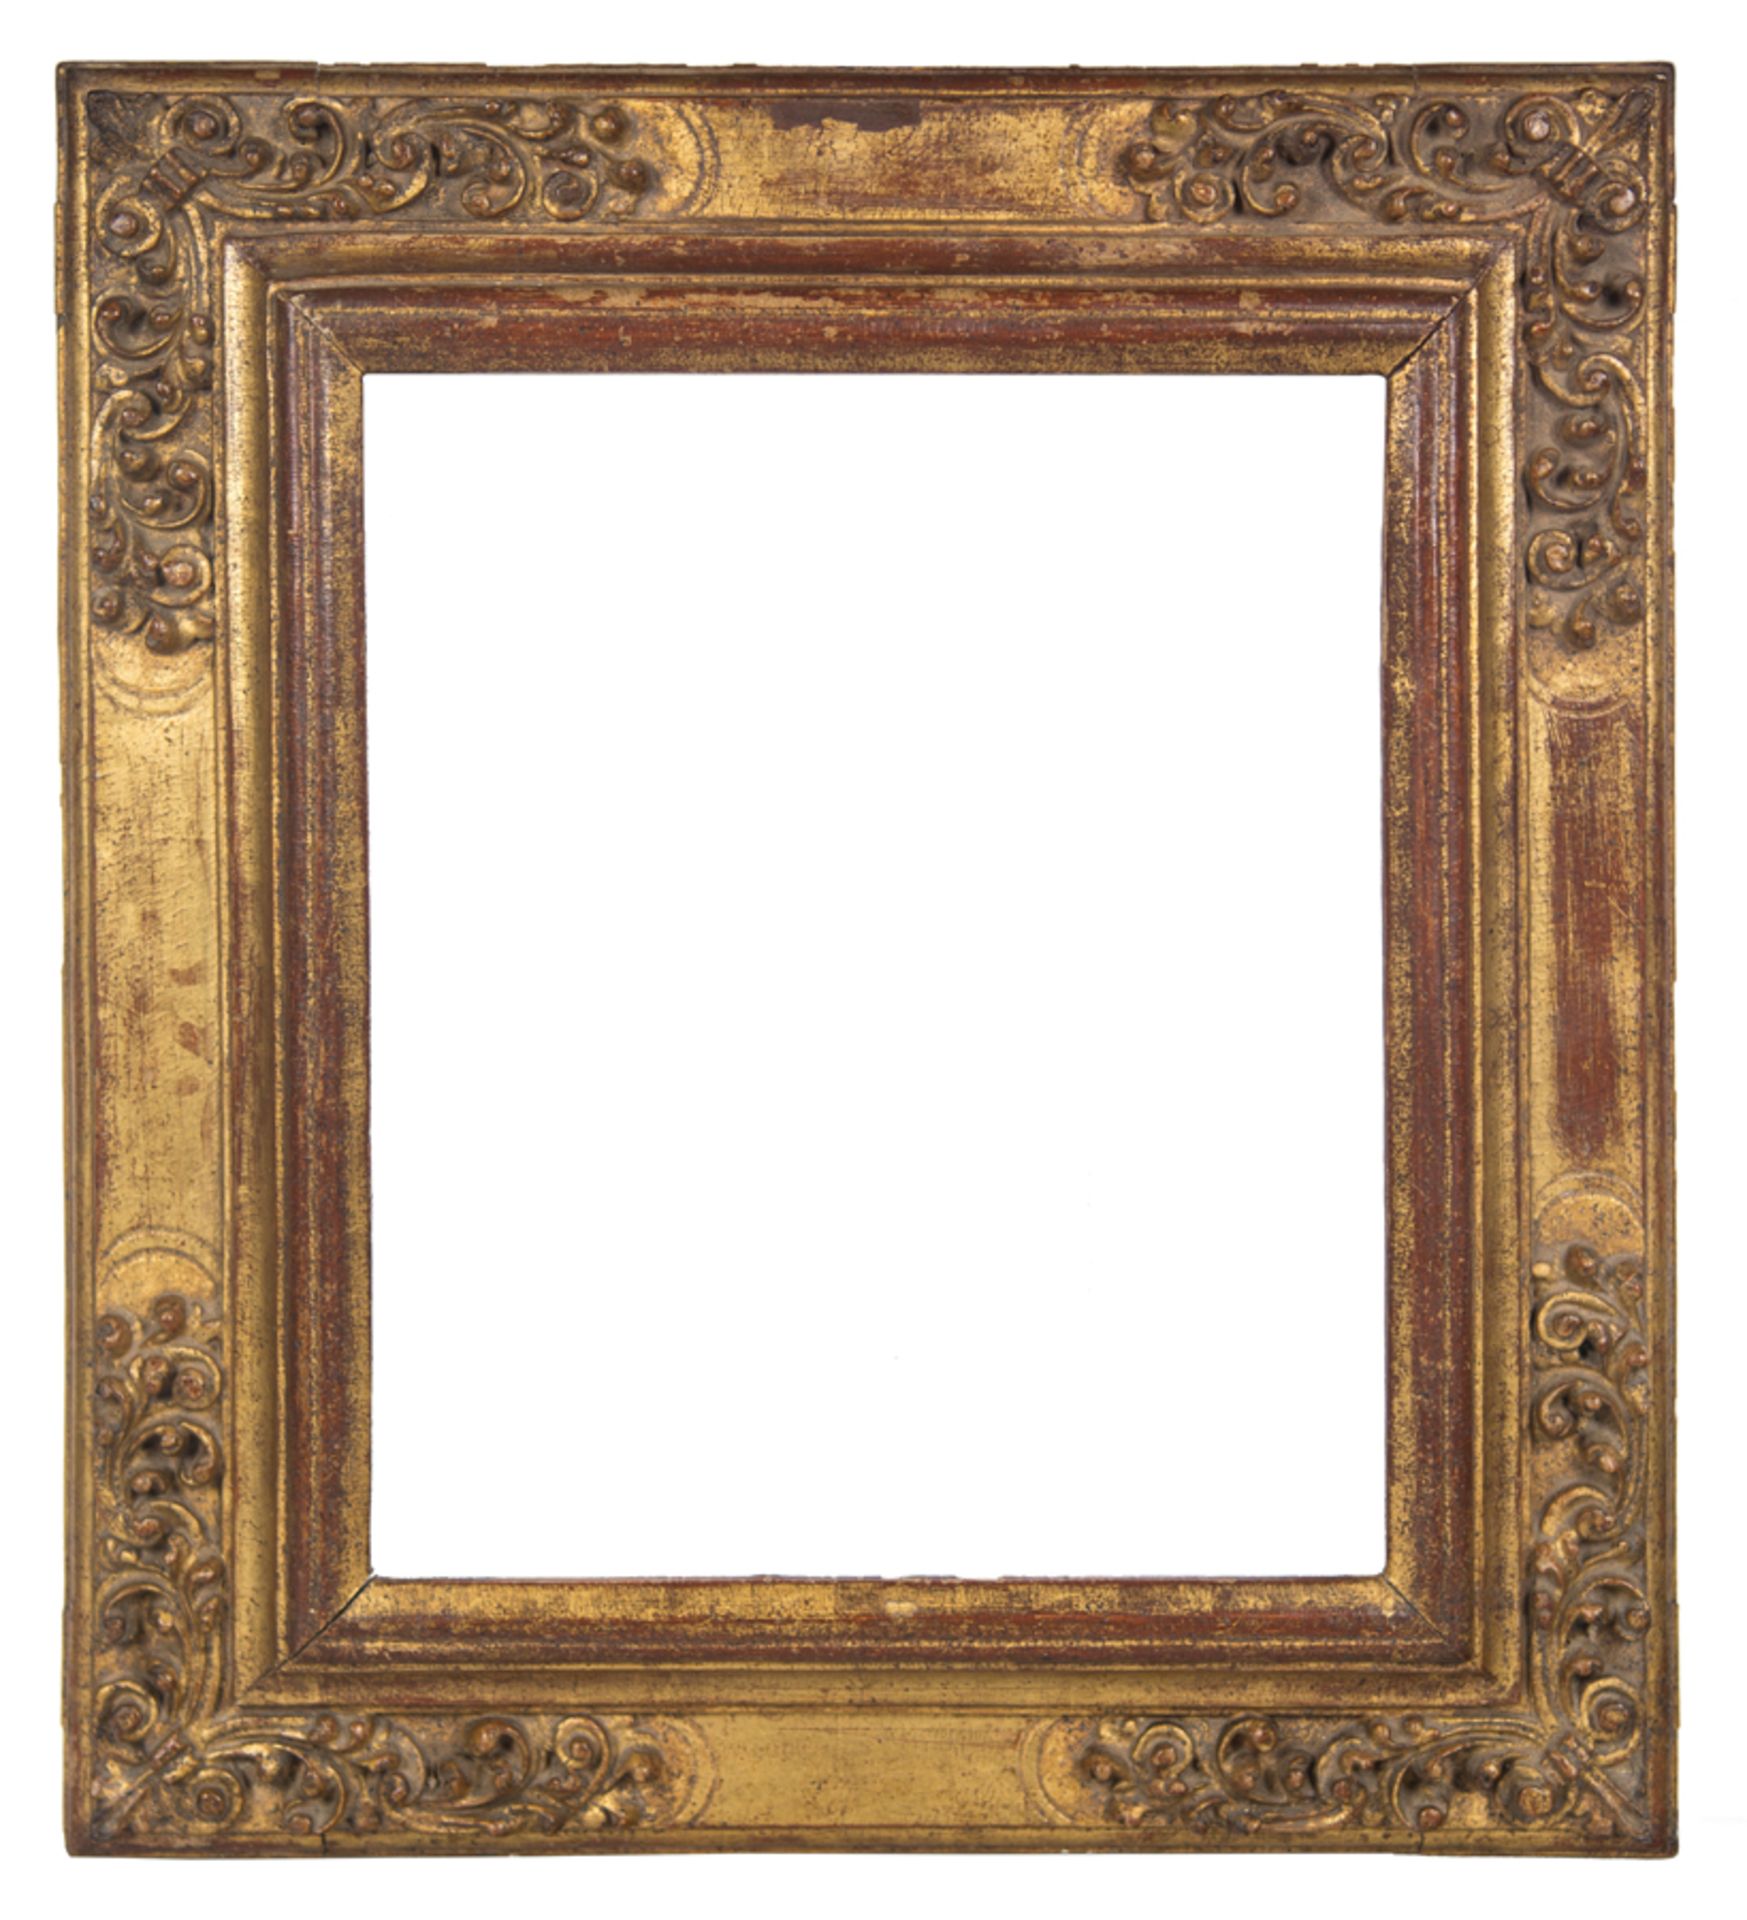 Carved and gilded wooden frame. Spanish work. 17th - 18th century.